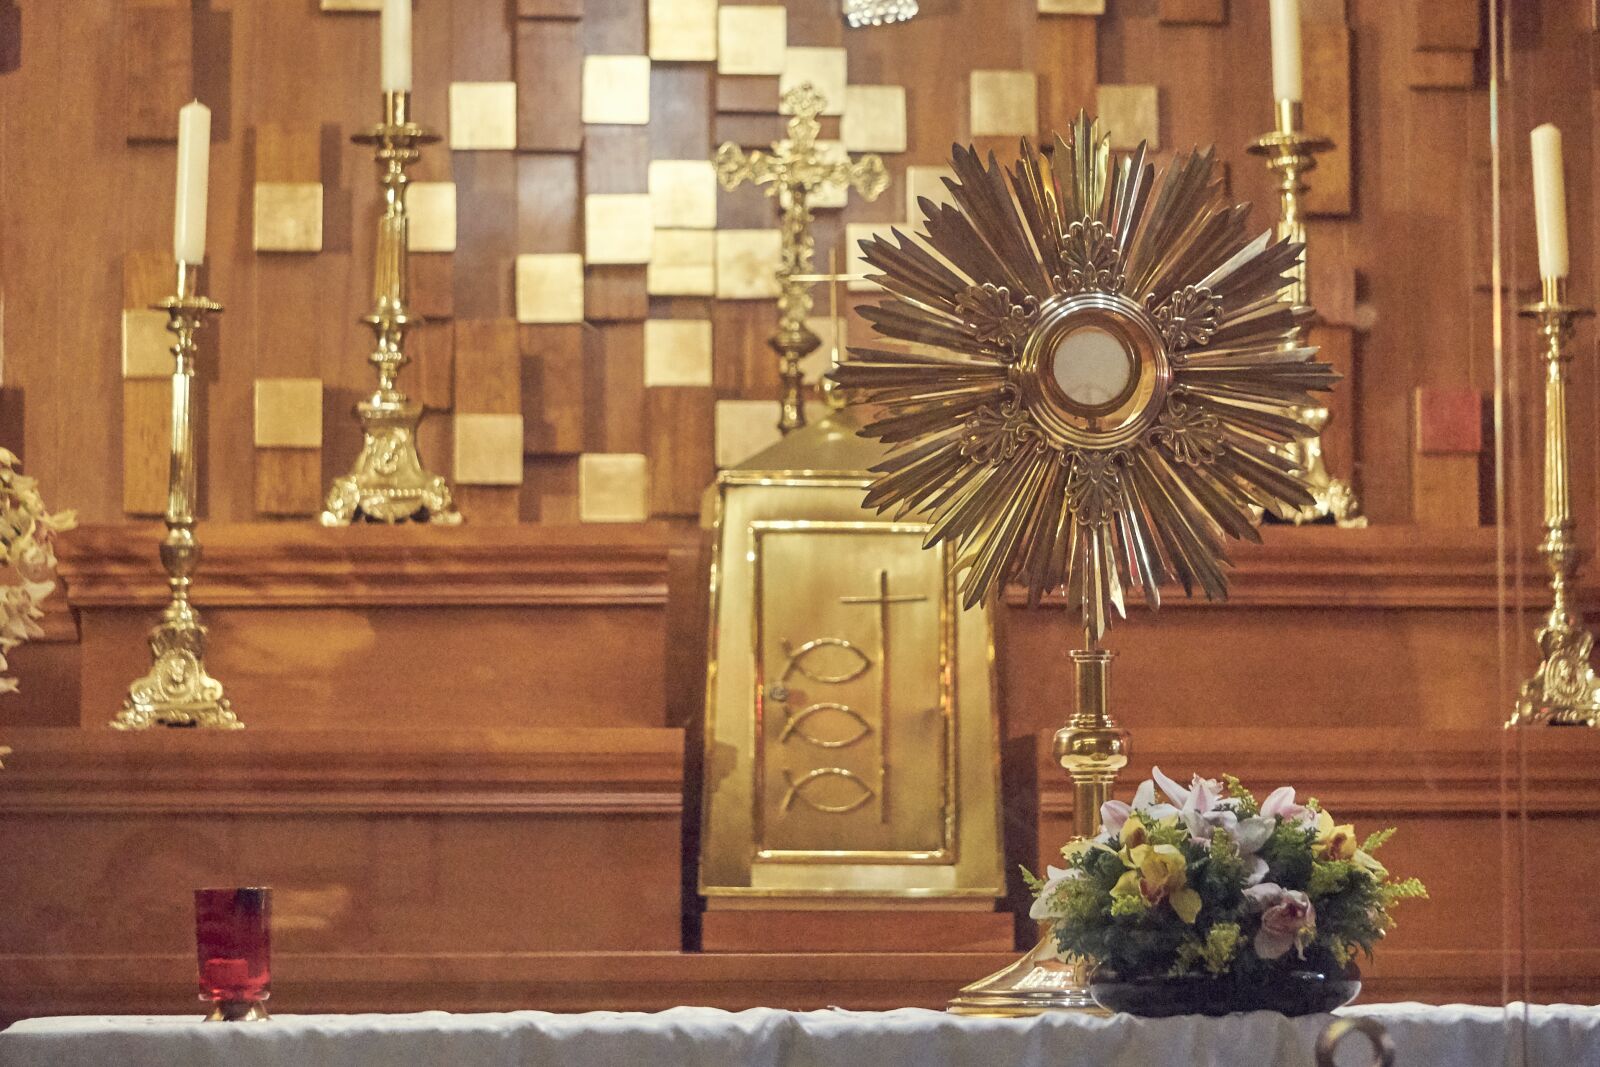 Sony a7 sample photo. Blessed sacrament, eucharist, exhibition photography